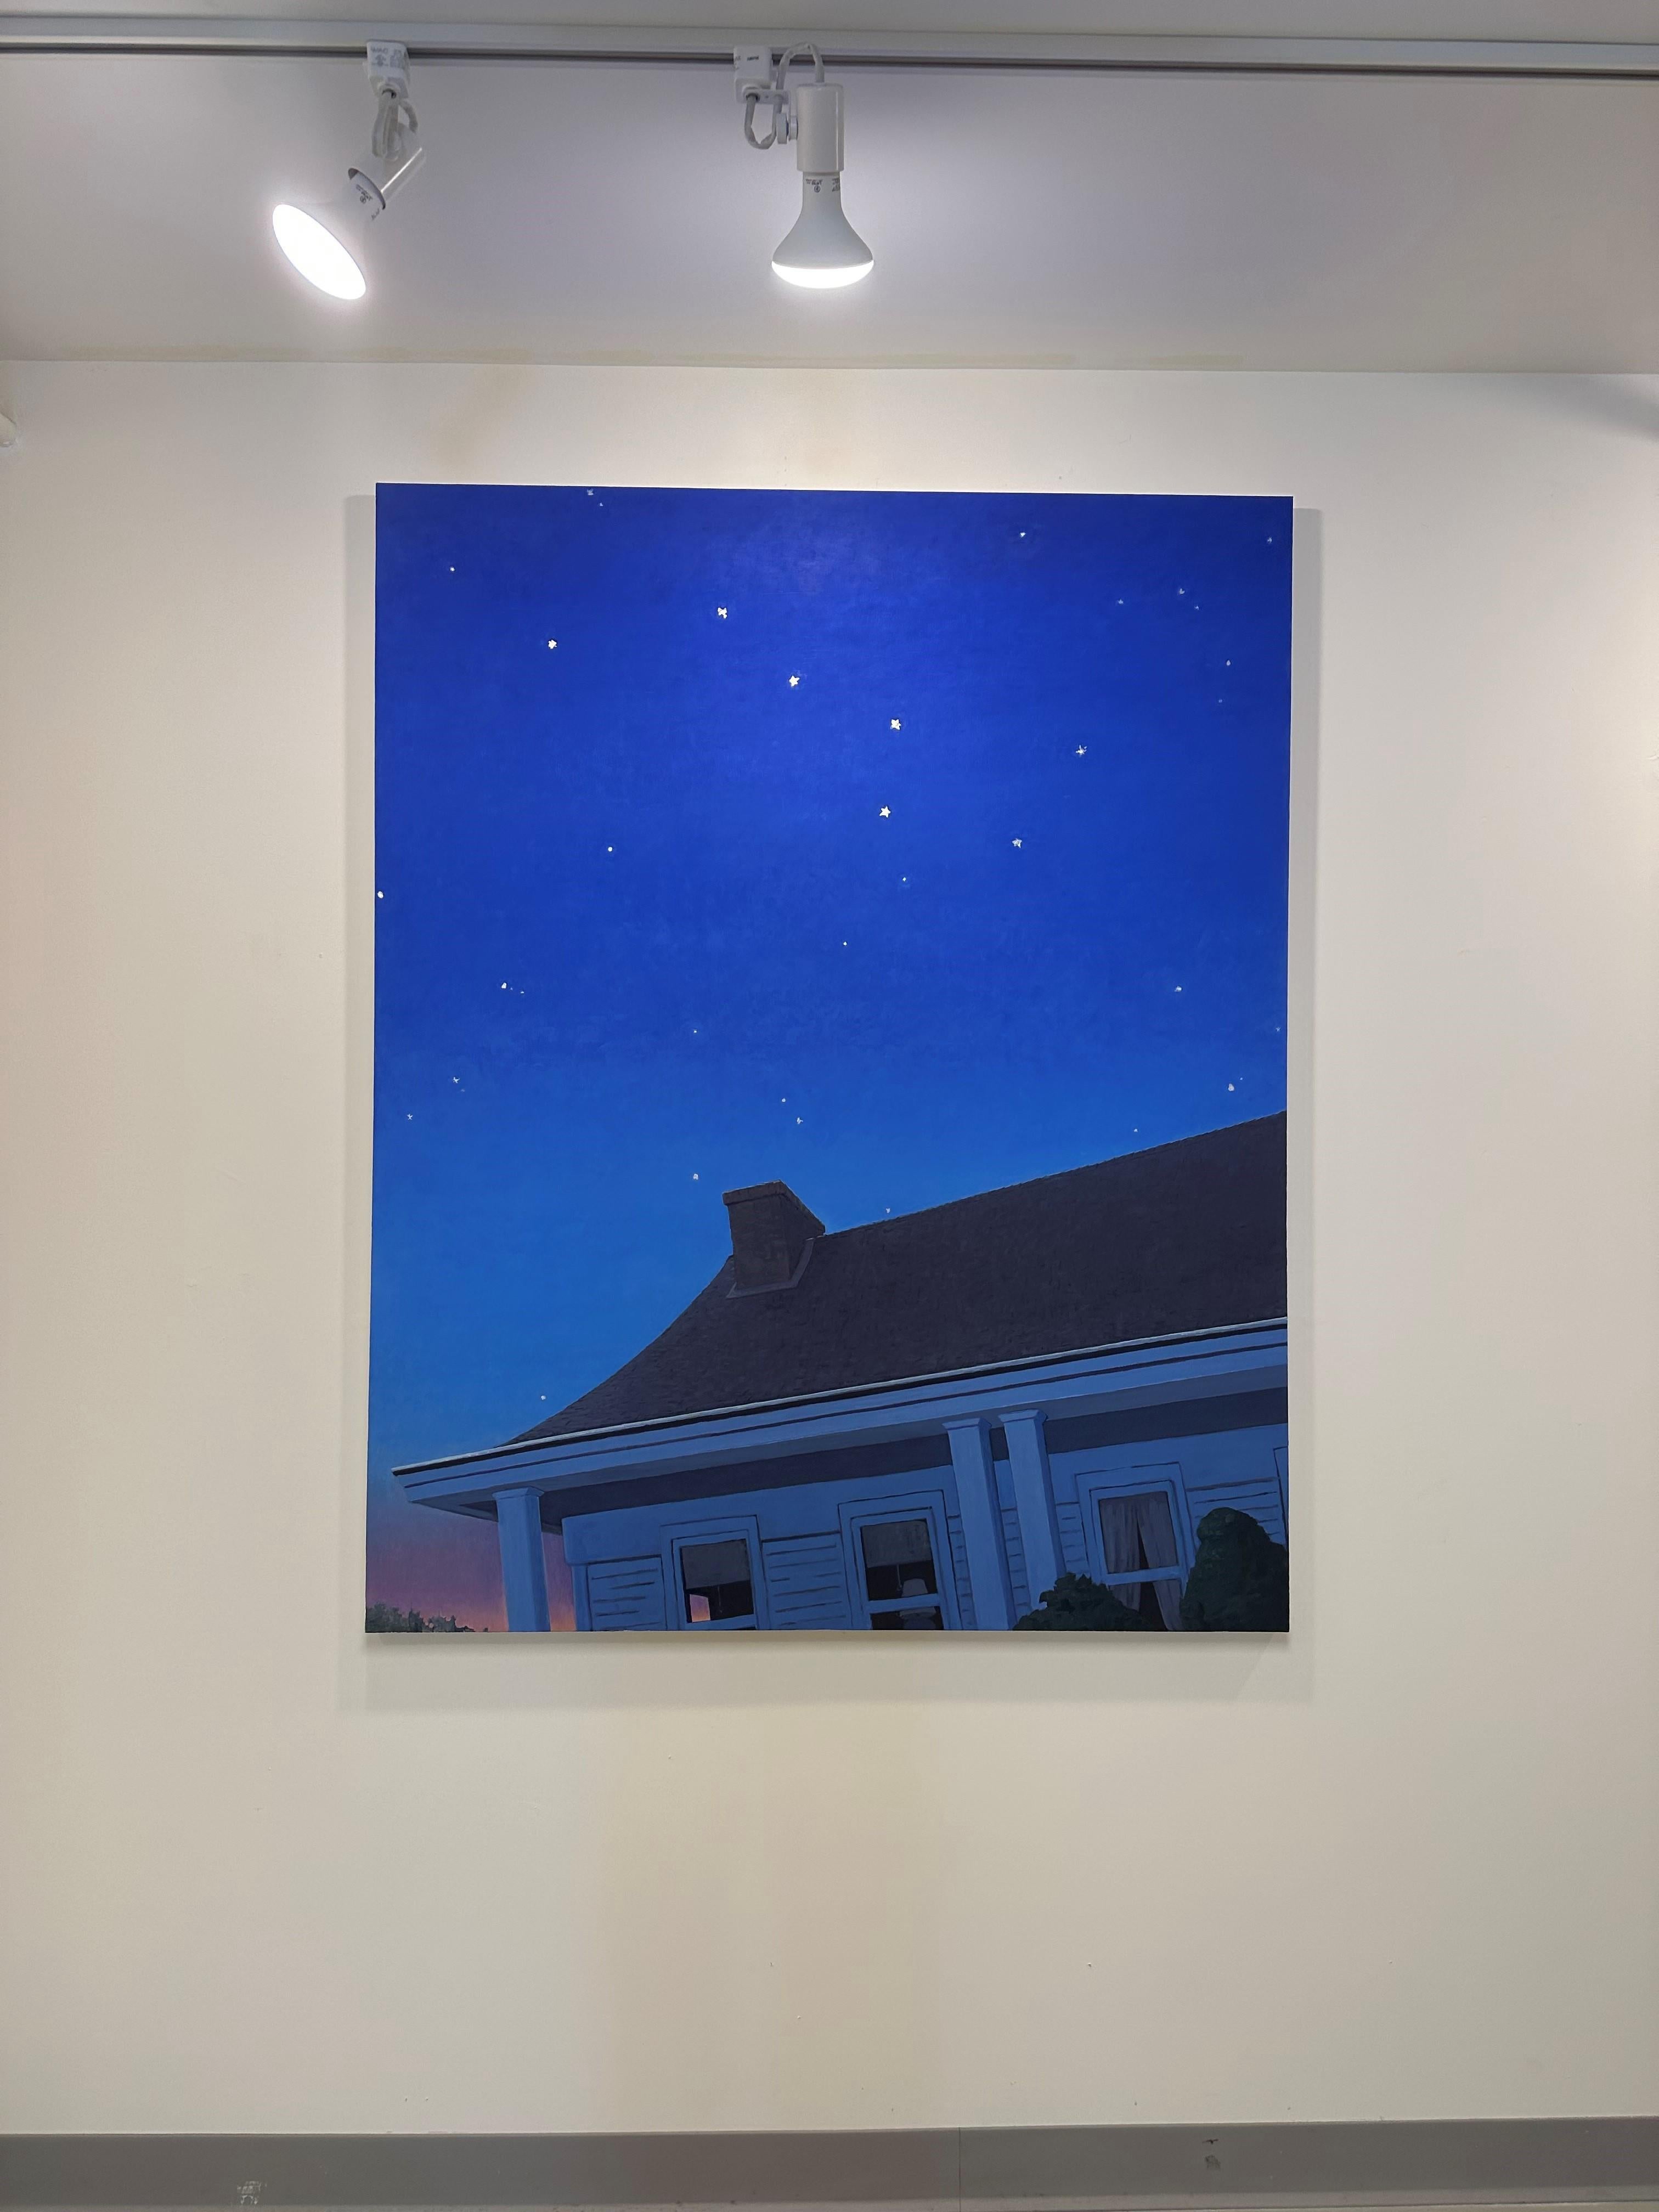 A peaceful nighttime painting of the chimney and roof of a white house against a serene twilight sky darkening from a golden peach to a deep, dark cobalt blue. The night sky is illuminated with softly shimmering white gold leaf stars. Signed, dated